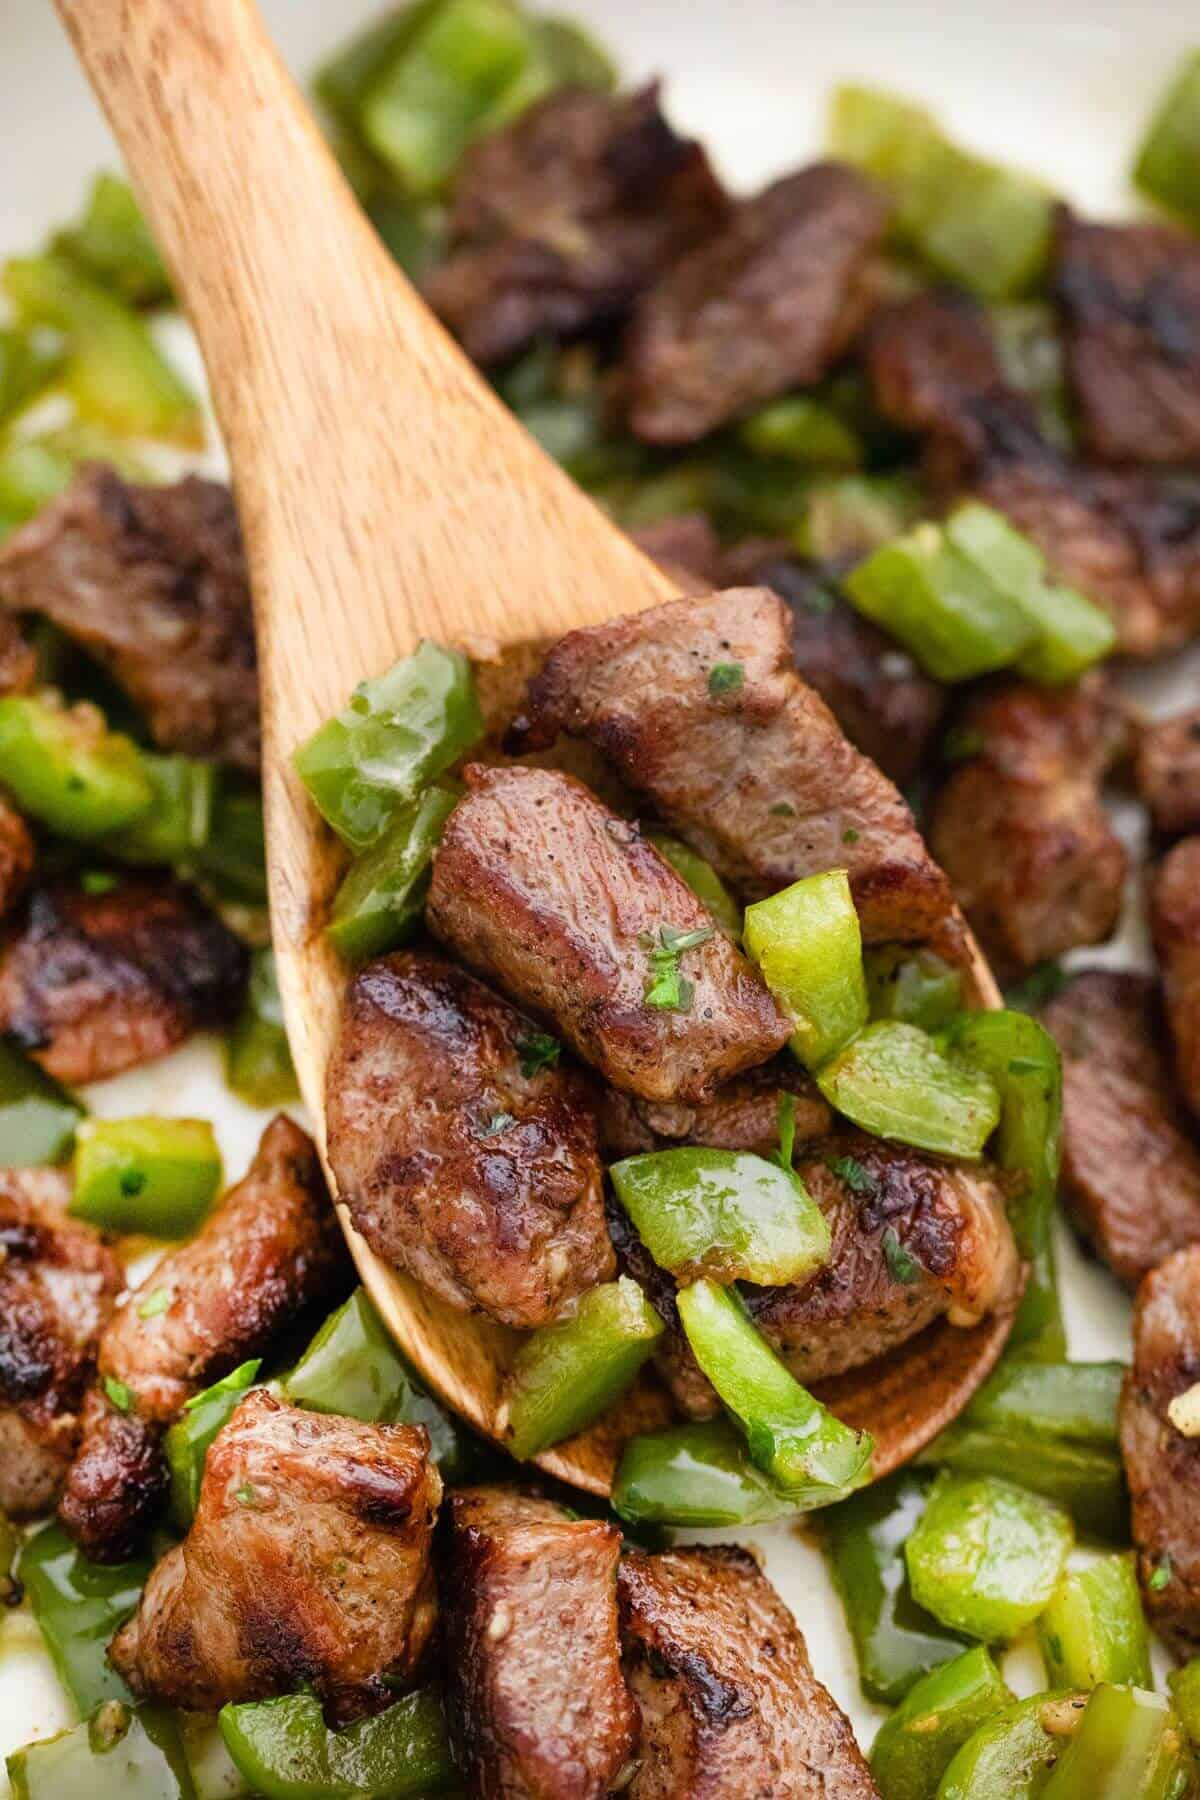 A wooden spoon filled with meat and green pepper.